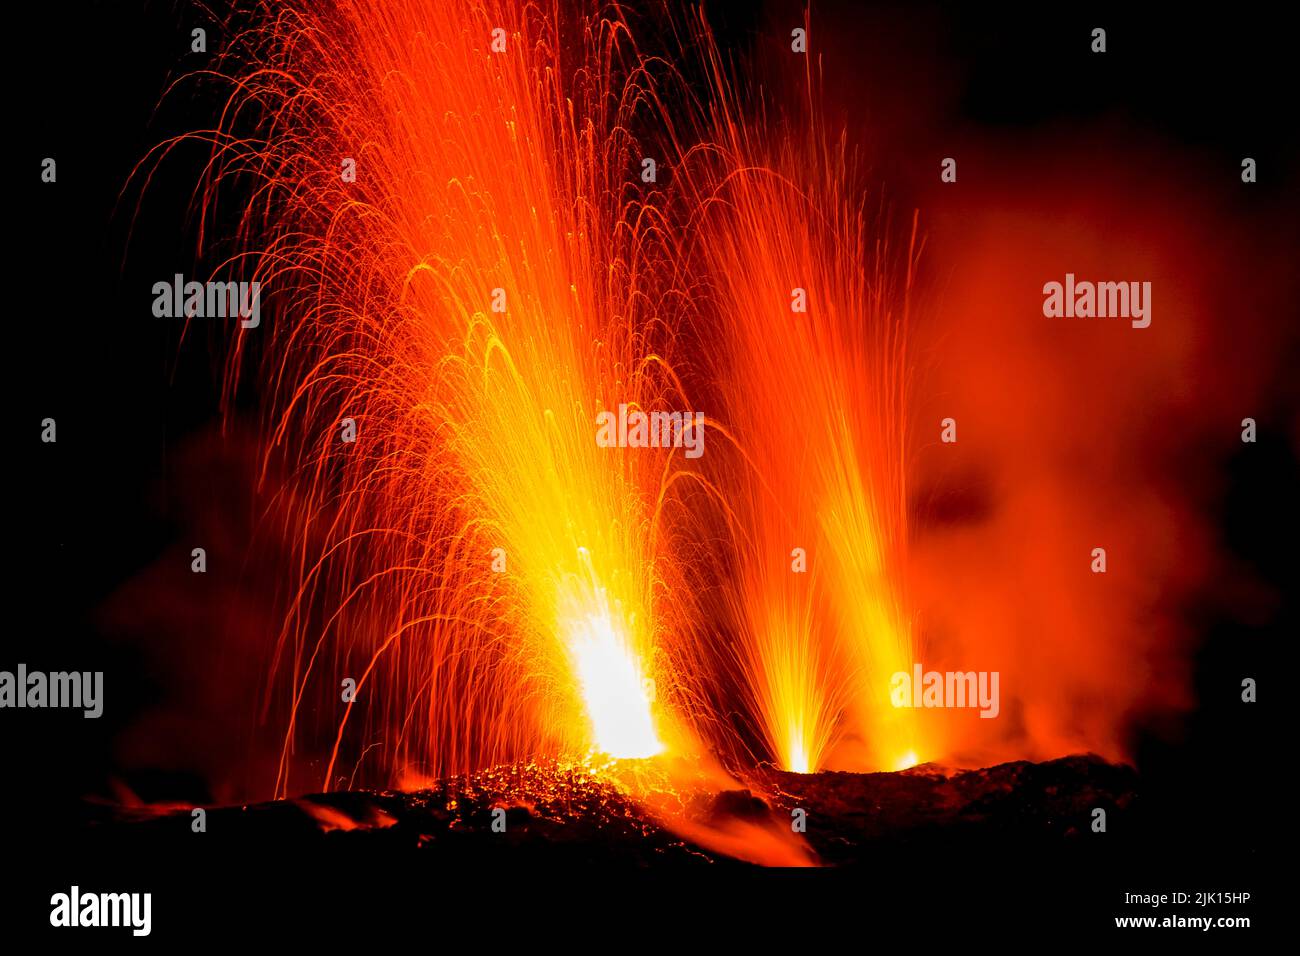 Lava bombs erupt from multiple vents on volcano, active for at least 2000 years, Stromboli, Aeolian Islands, UNESCO World Heritage Site, Sicily, Italy Stock Photo